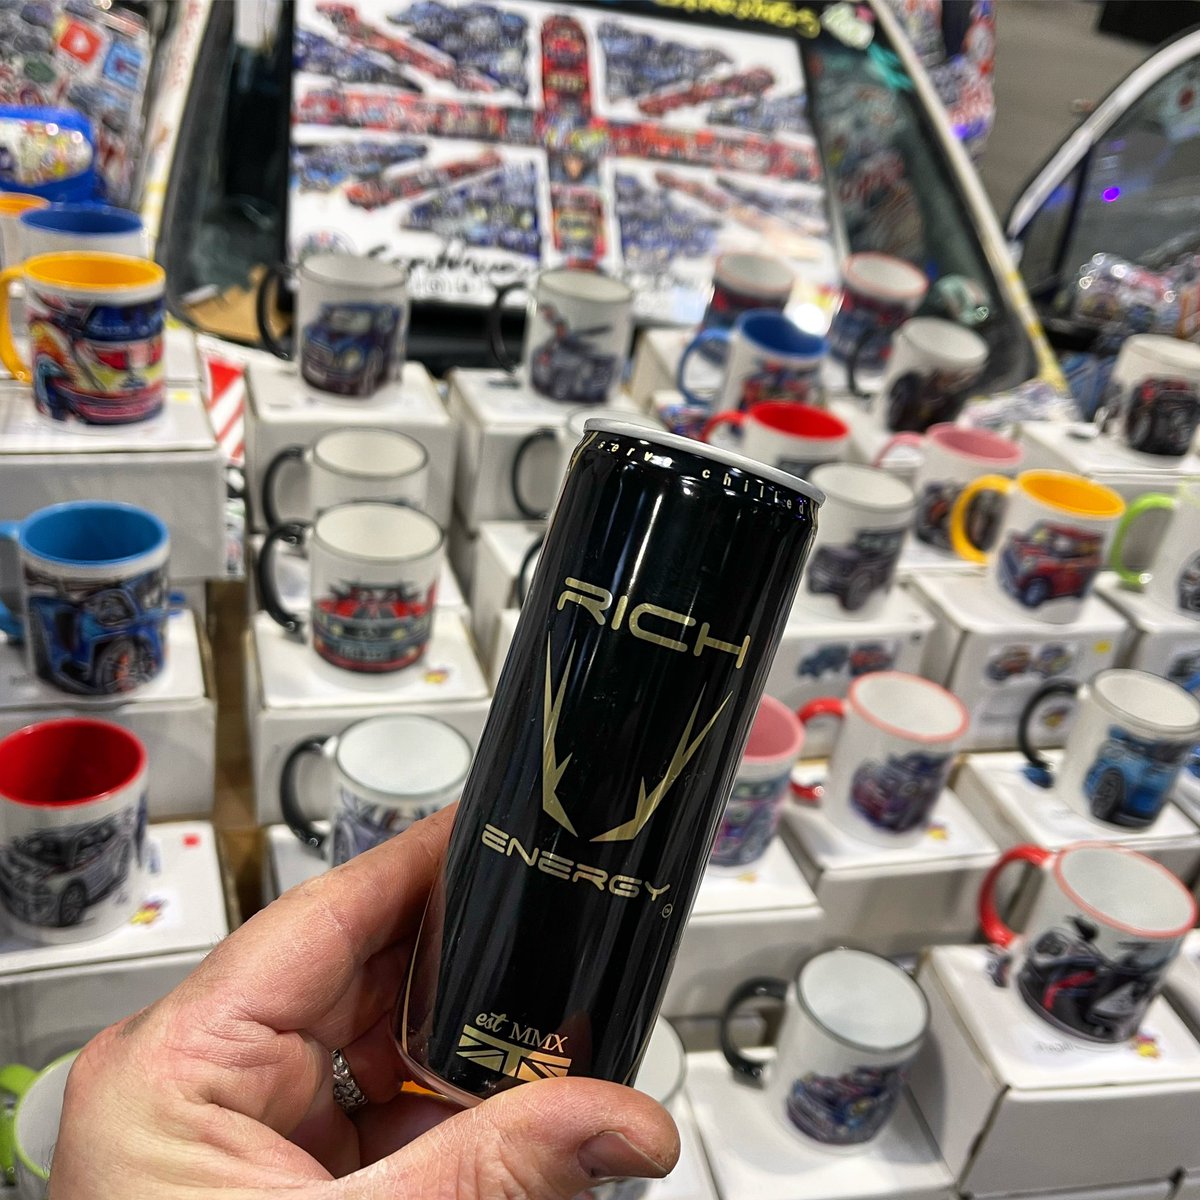 Along with hens teeth, flying pigs & gold at the end of rainbow, I’ve a can of actual Rich Energy - can confirm it’s real. 😲🦌

#RichEnergy #ASI23